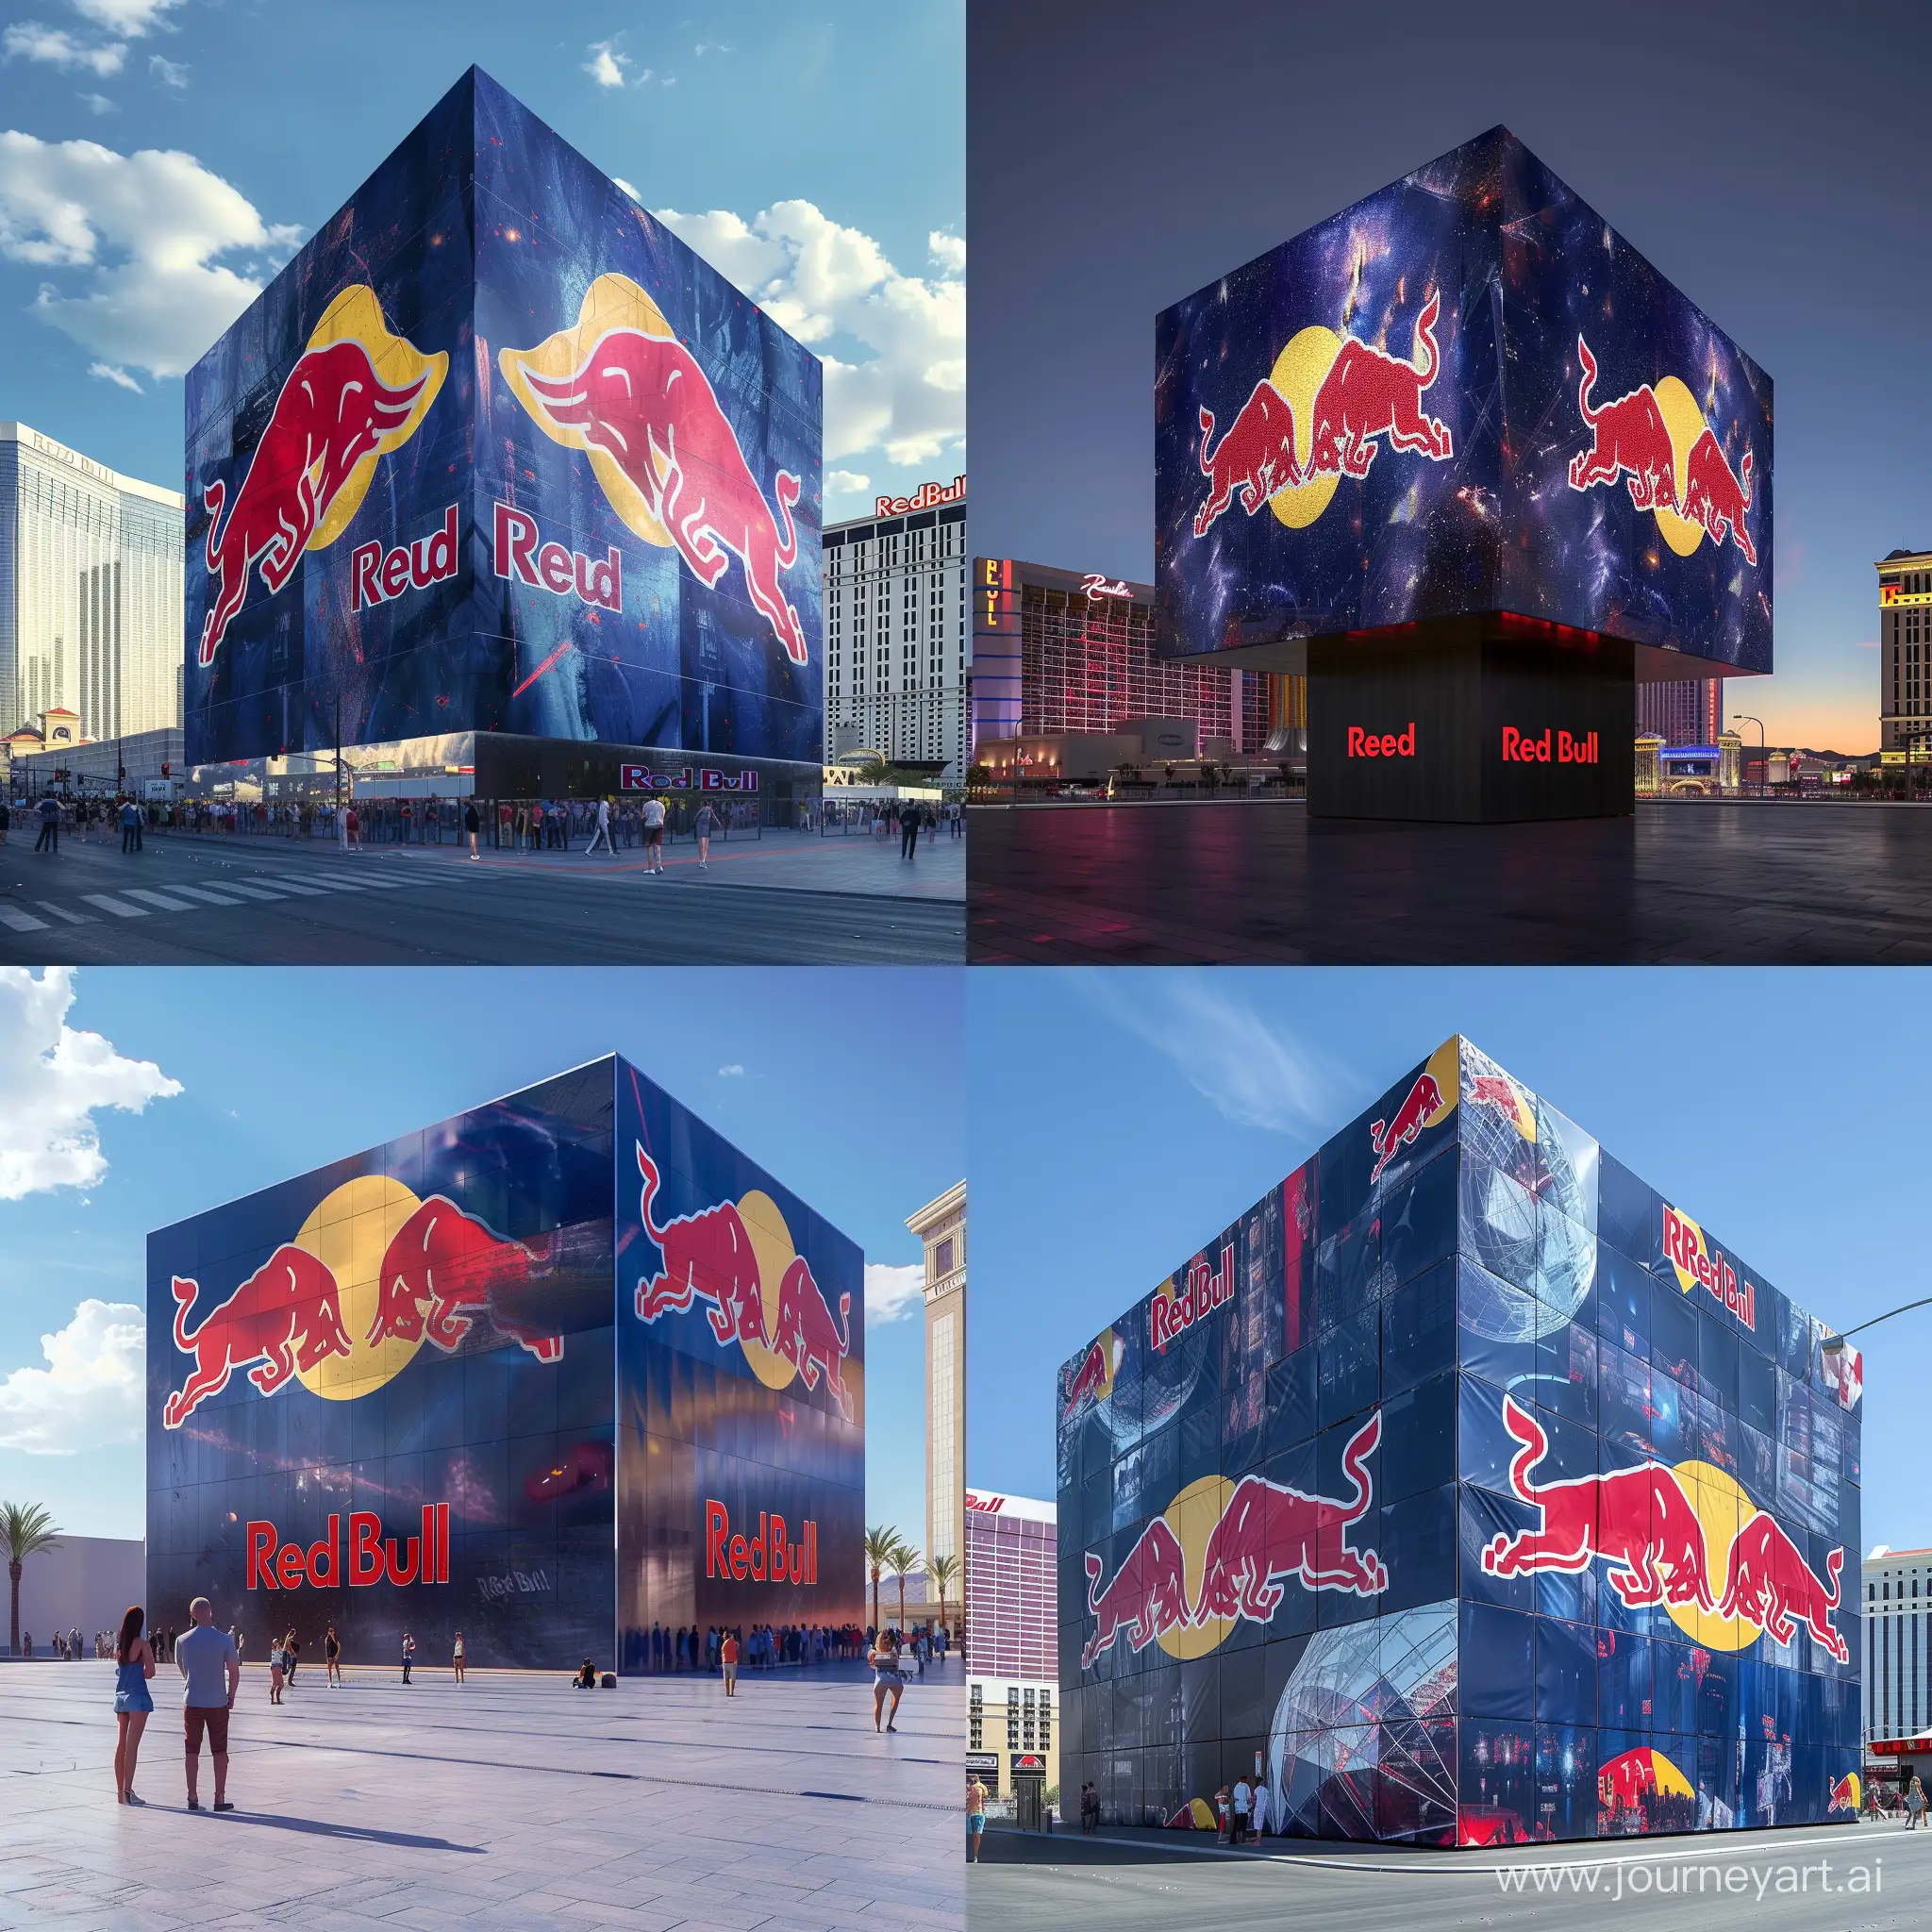 Imagine the Las Vegas Sphere, but owned by Red Bull. How it would look like? It doesn't have to be a Sphere, make it square-shaped.
Please have a realistic approach, make it it look like a photograph. Red Bull visuals have to cover the whole square, not only the logo in a corner. The walls need to be able to be dismounted, transported somewhere else, and built the building again.
Please deliver a picture with big resolution, and make sure the branding is correct. Make sure "Red Bull" is well written, and the logo is right. 
